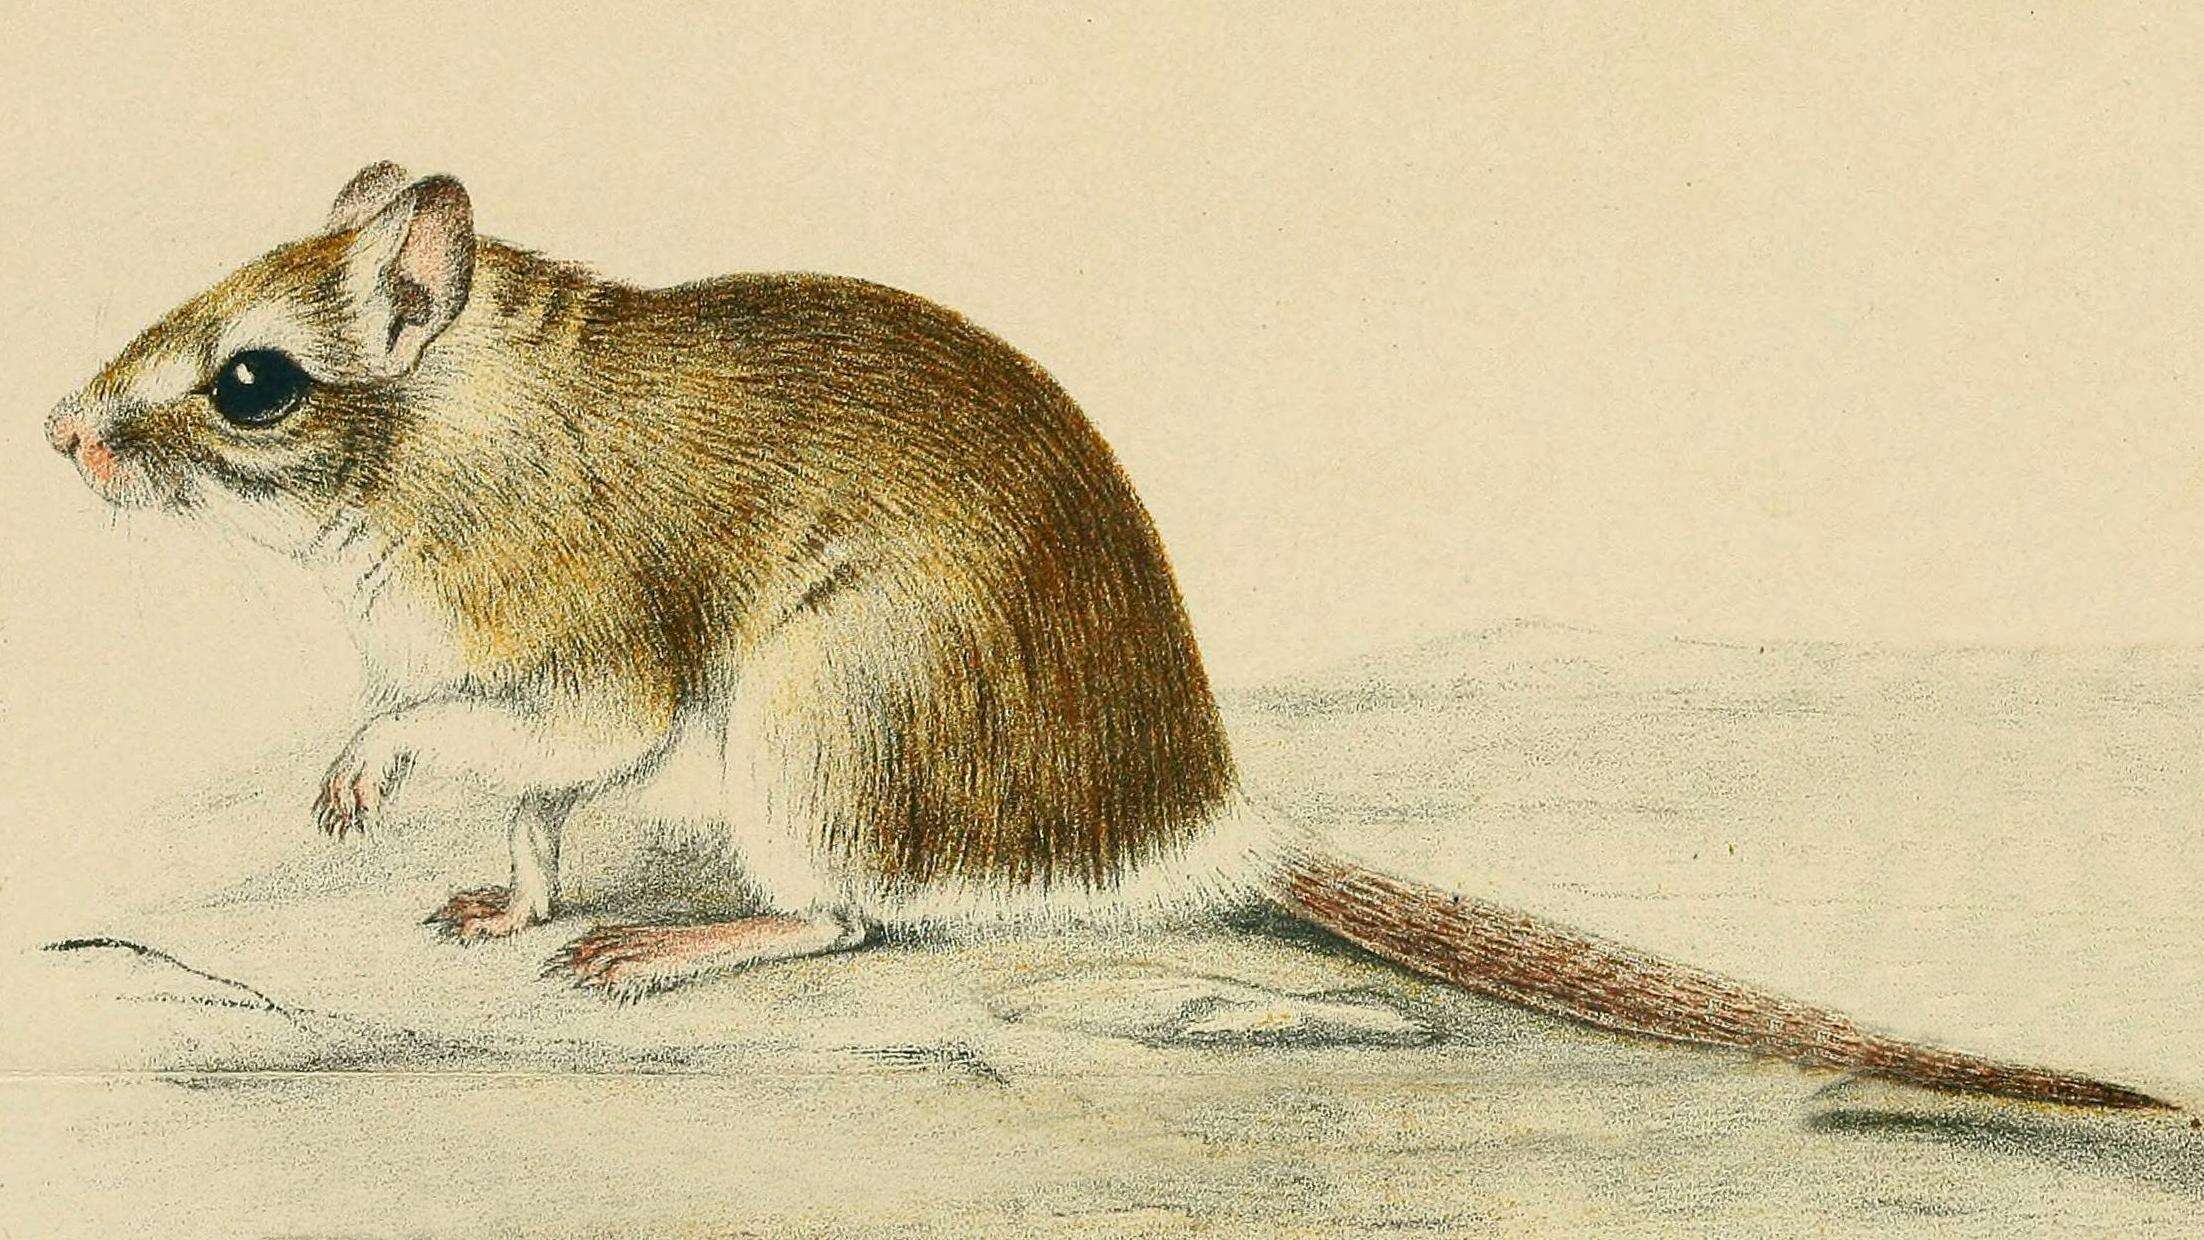 Image of Lesser Short-tailed Gerbil